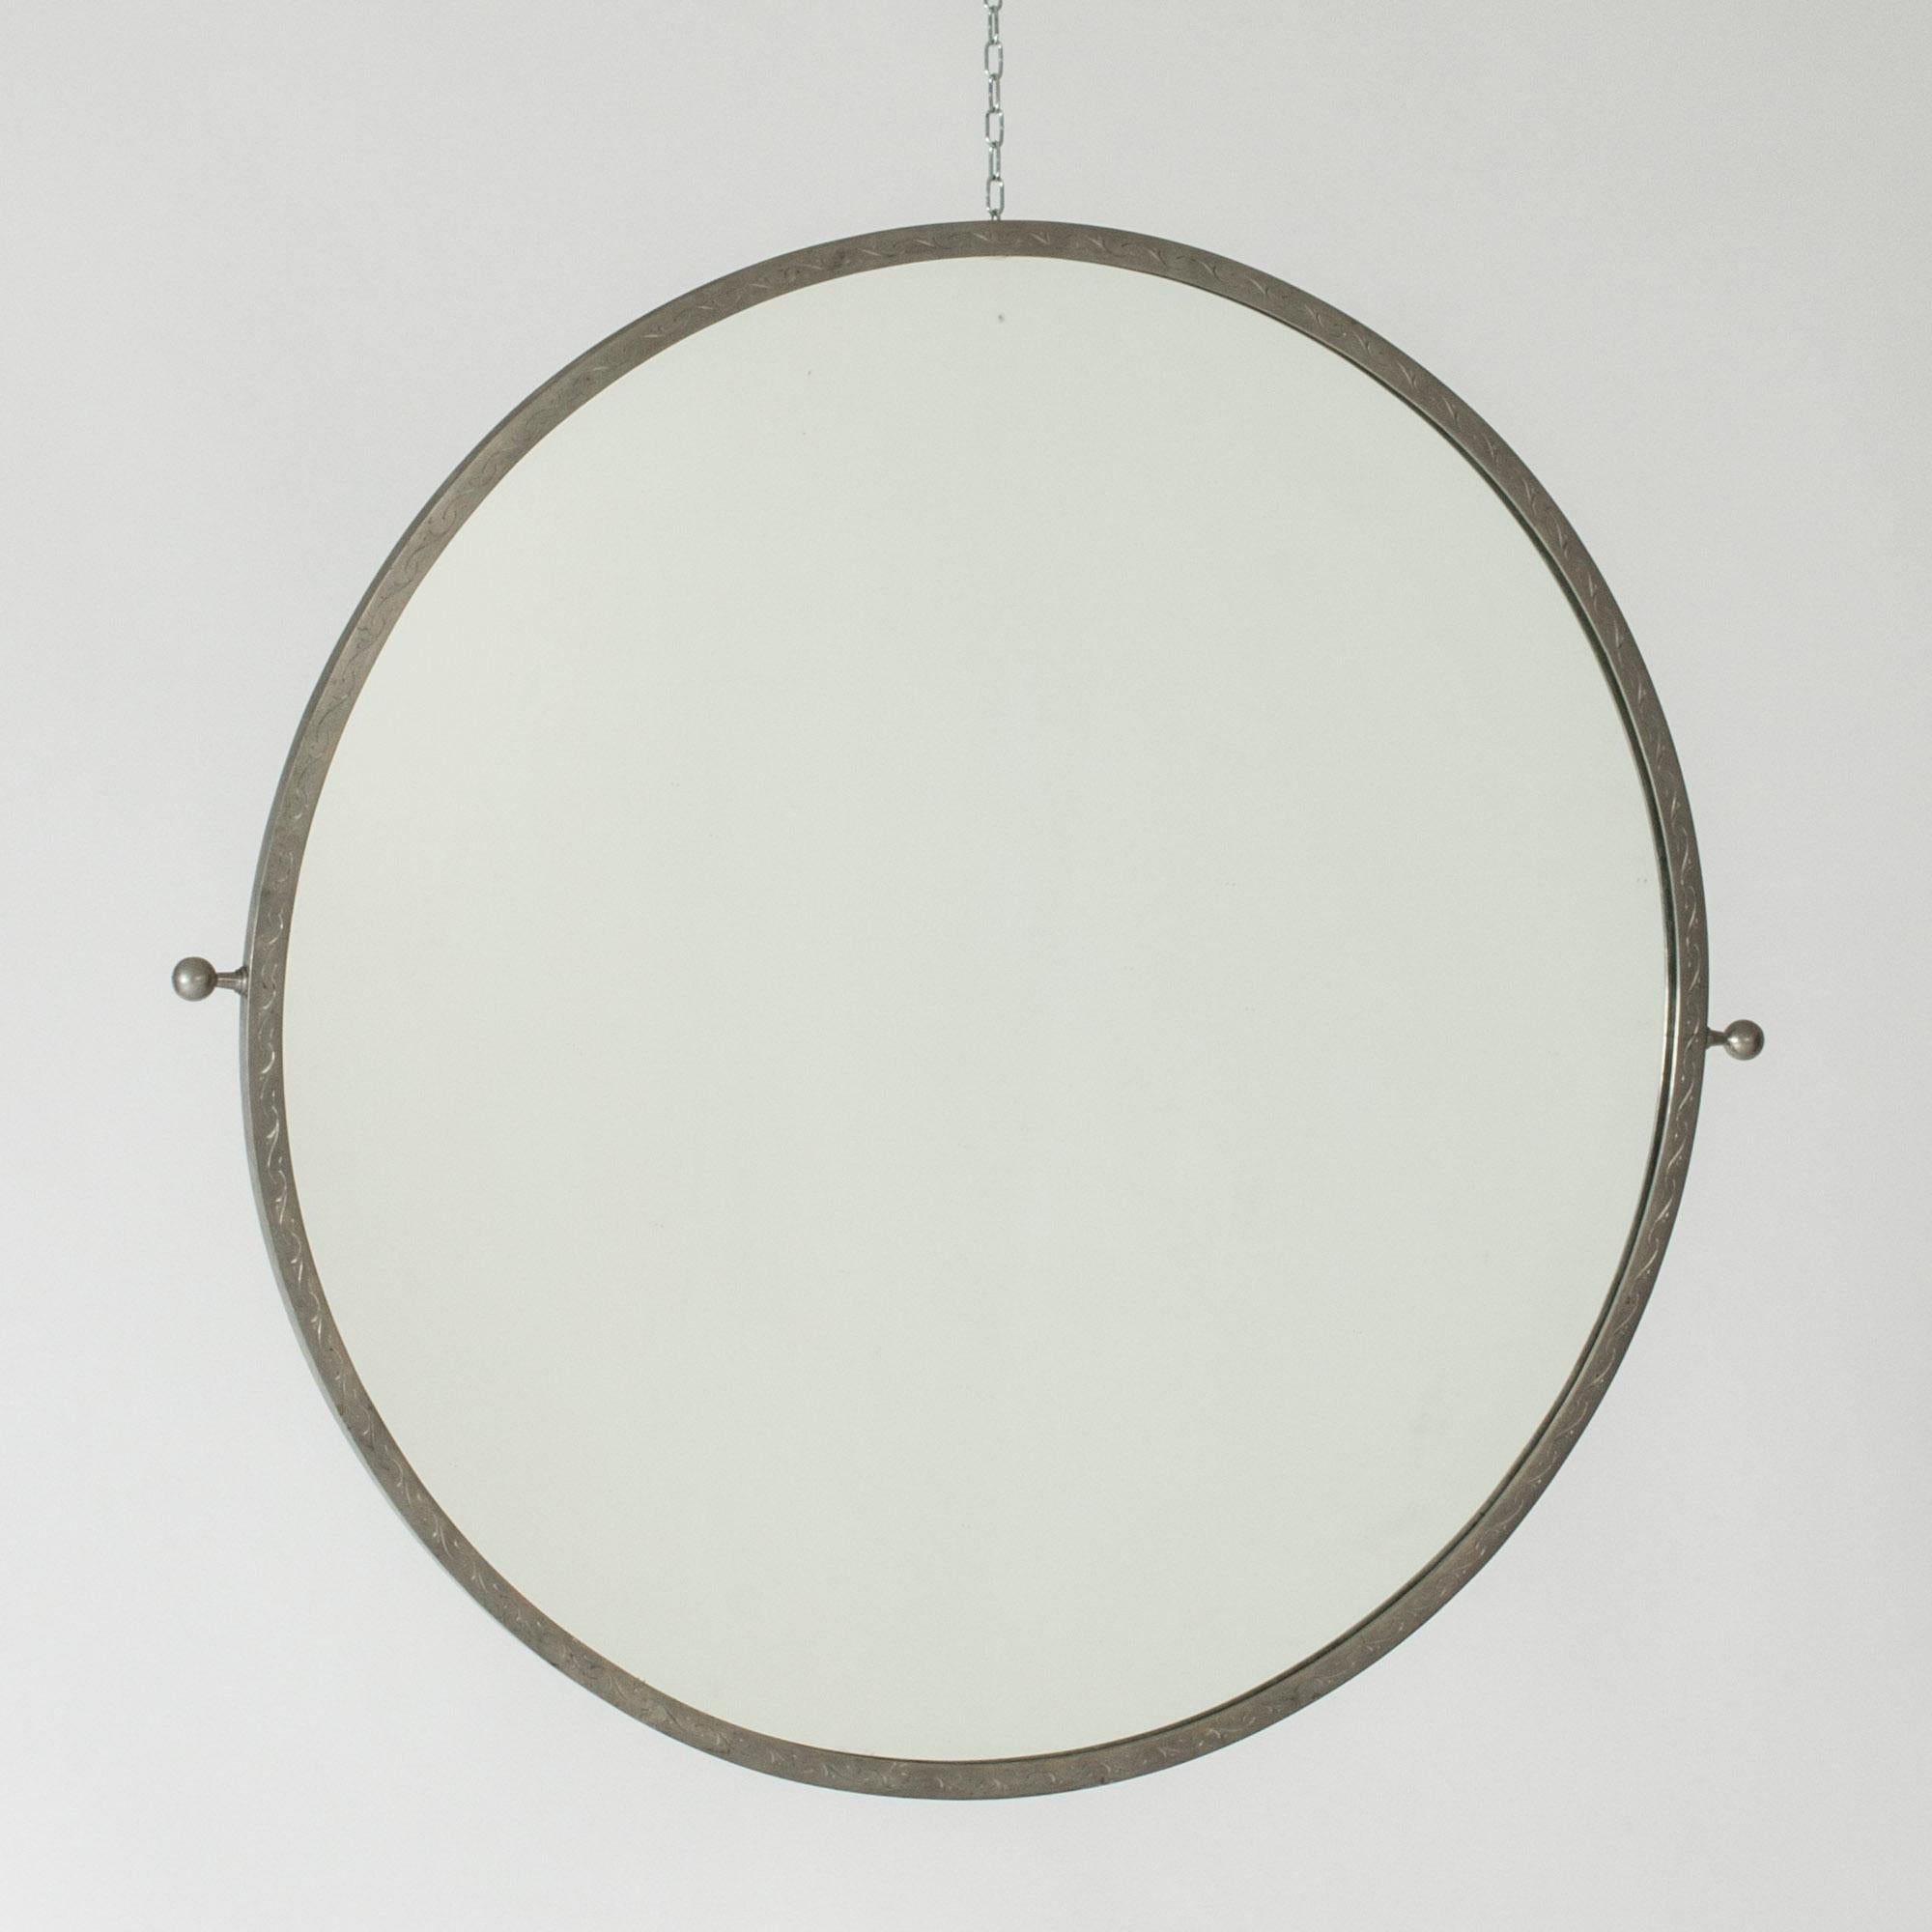 Elegant Swedish Modern pewter wall mirror. Large size, in a clean design with decorative details. Subtle pattern etched onto the frame, knobs on the sides.